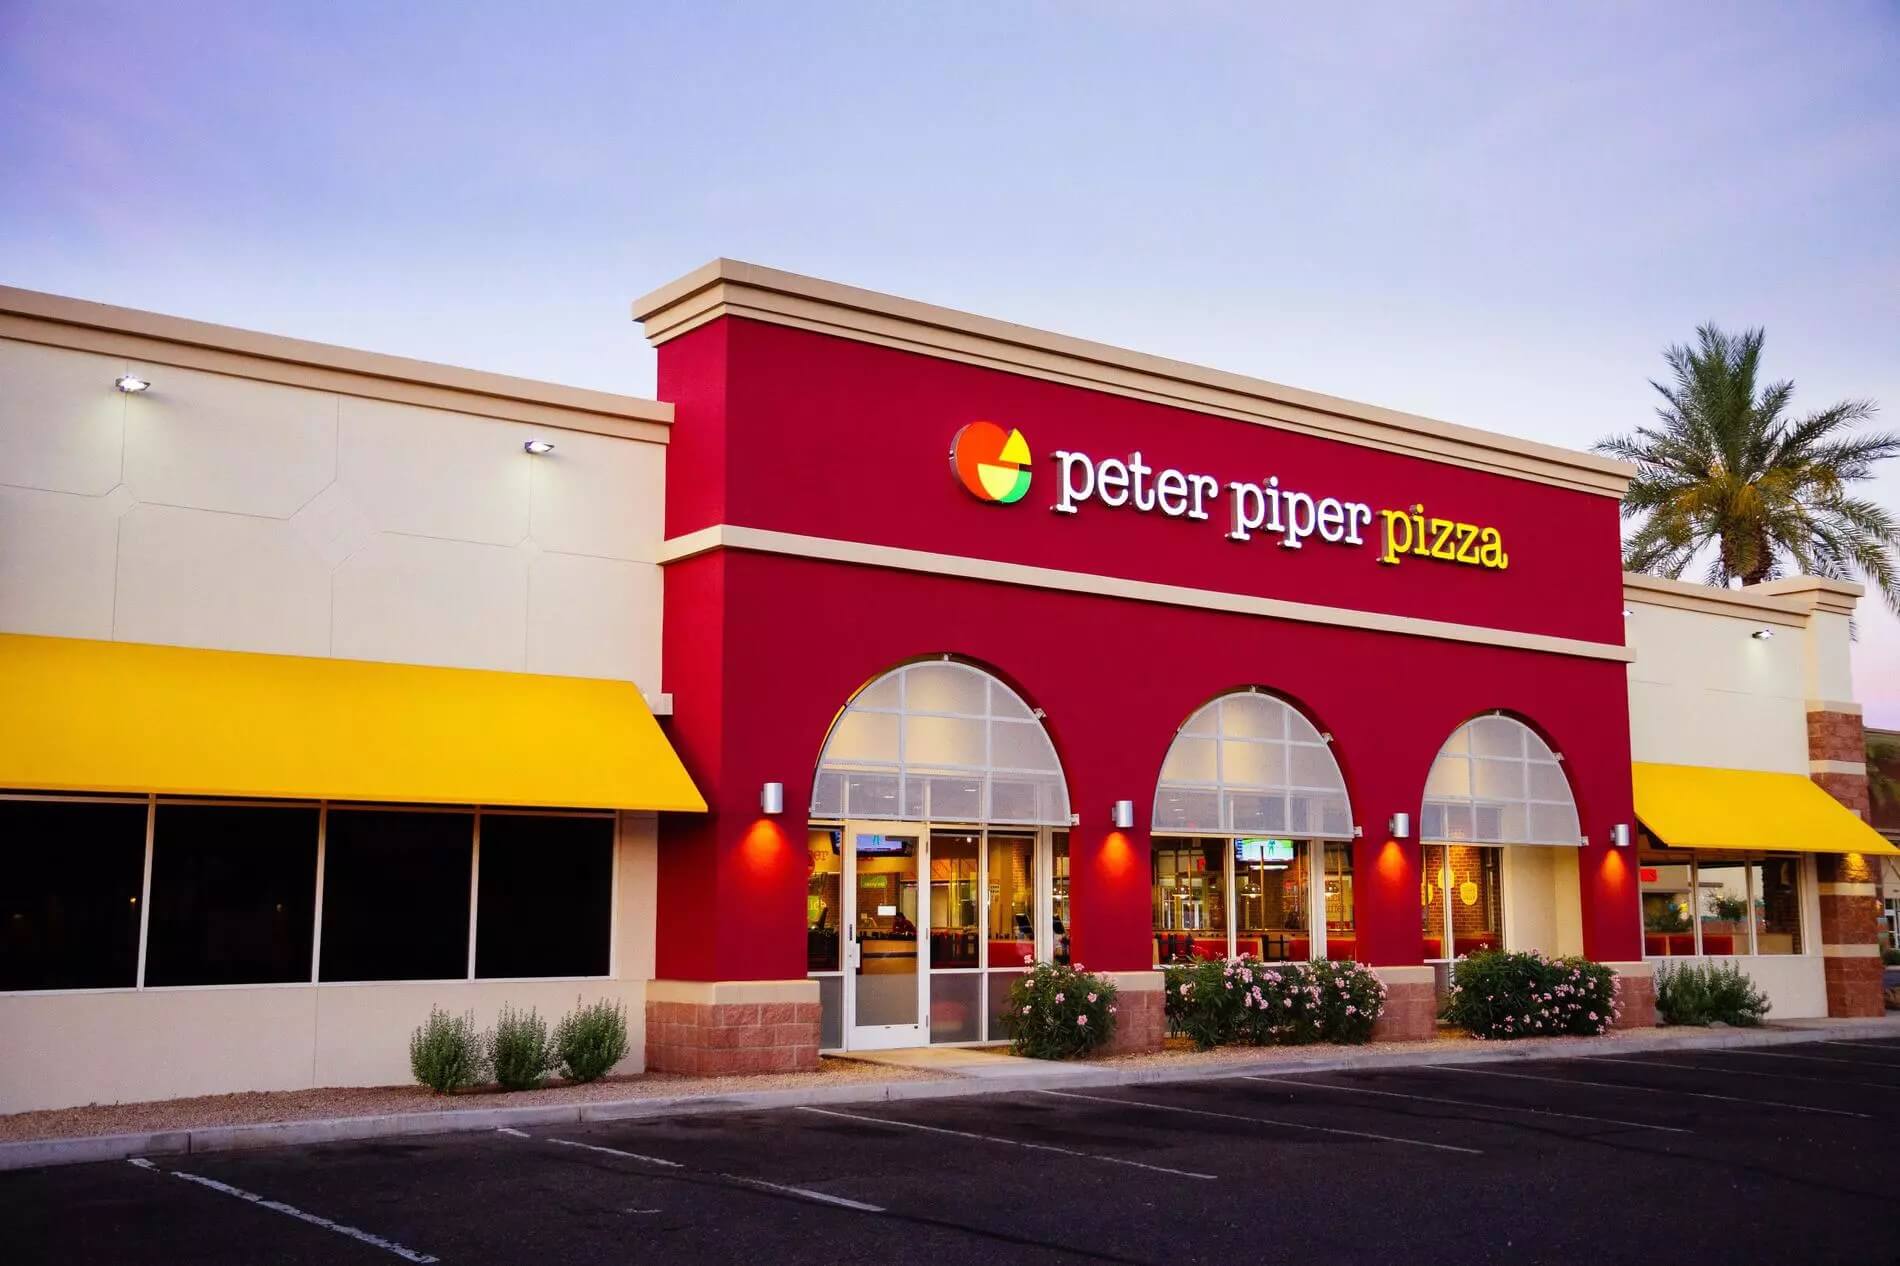 Glendale Pizza & Kids Birthday Parties | Peter Piper Pizza Location #1281